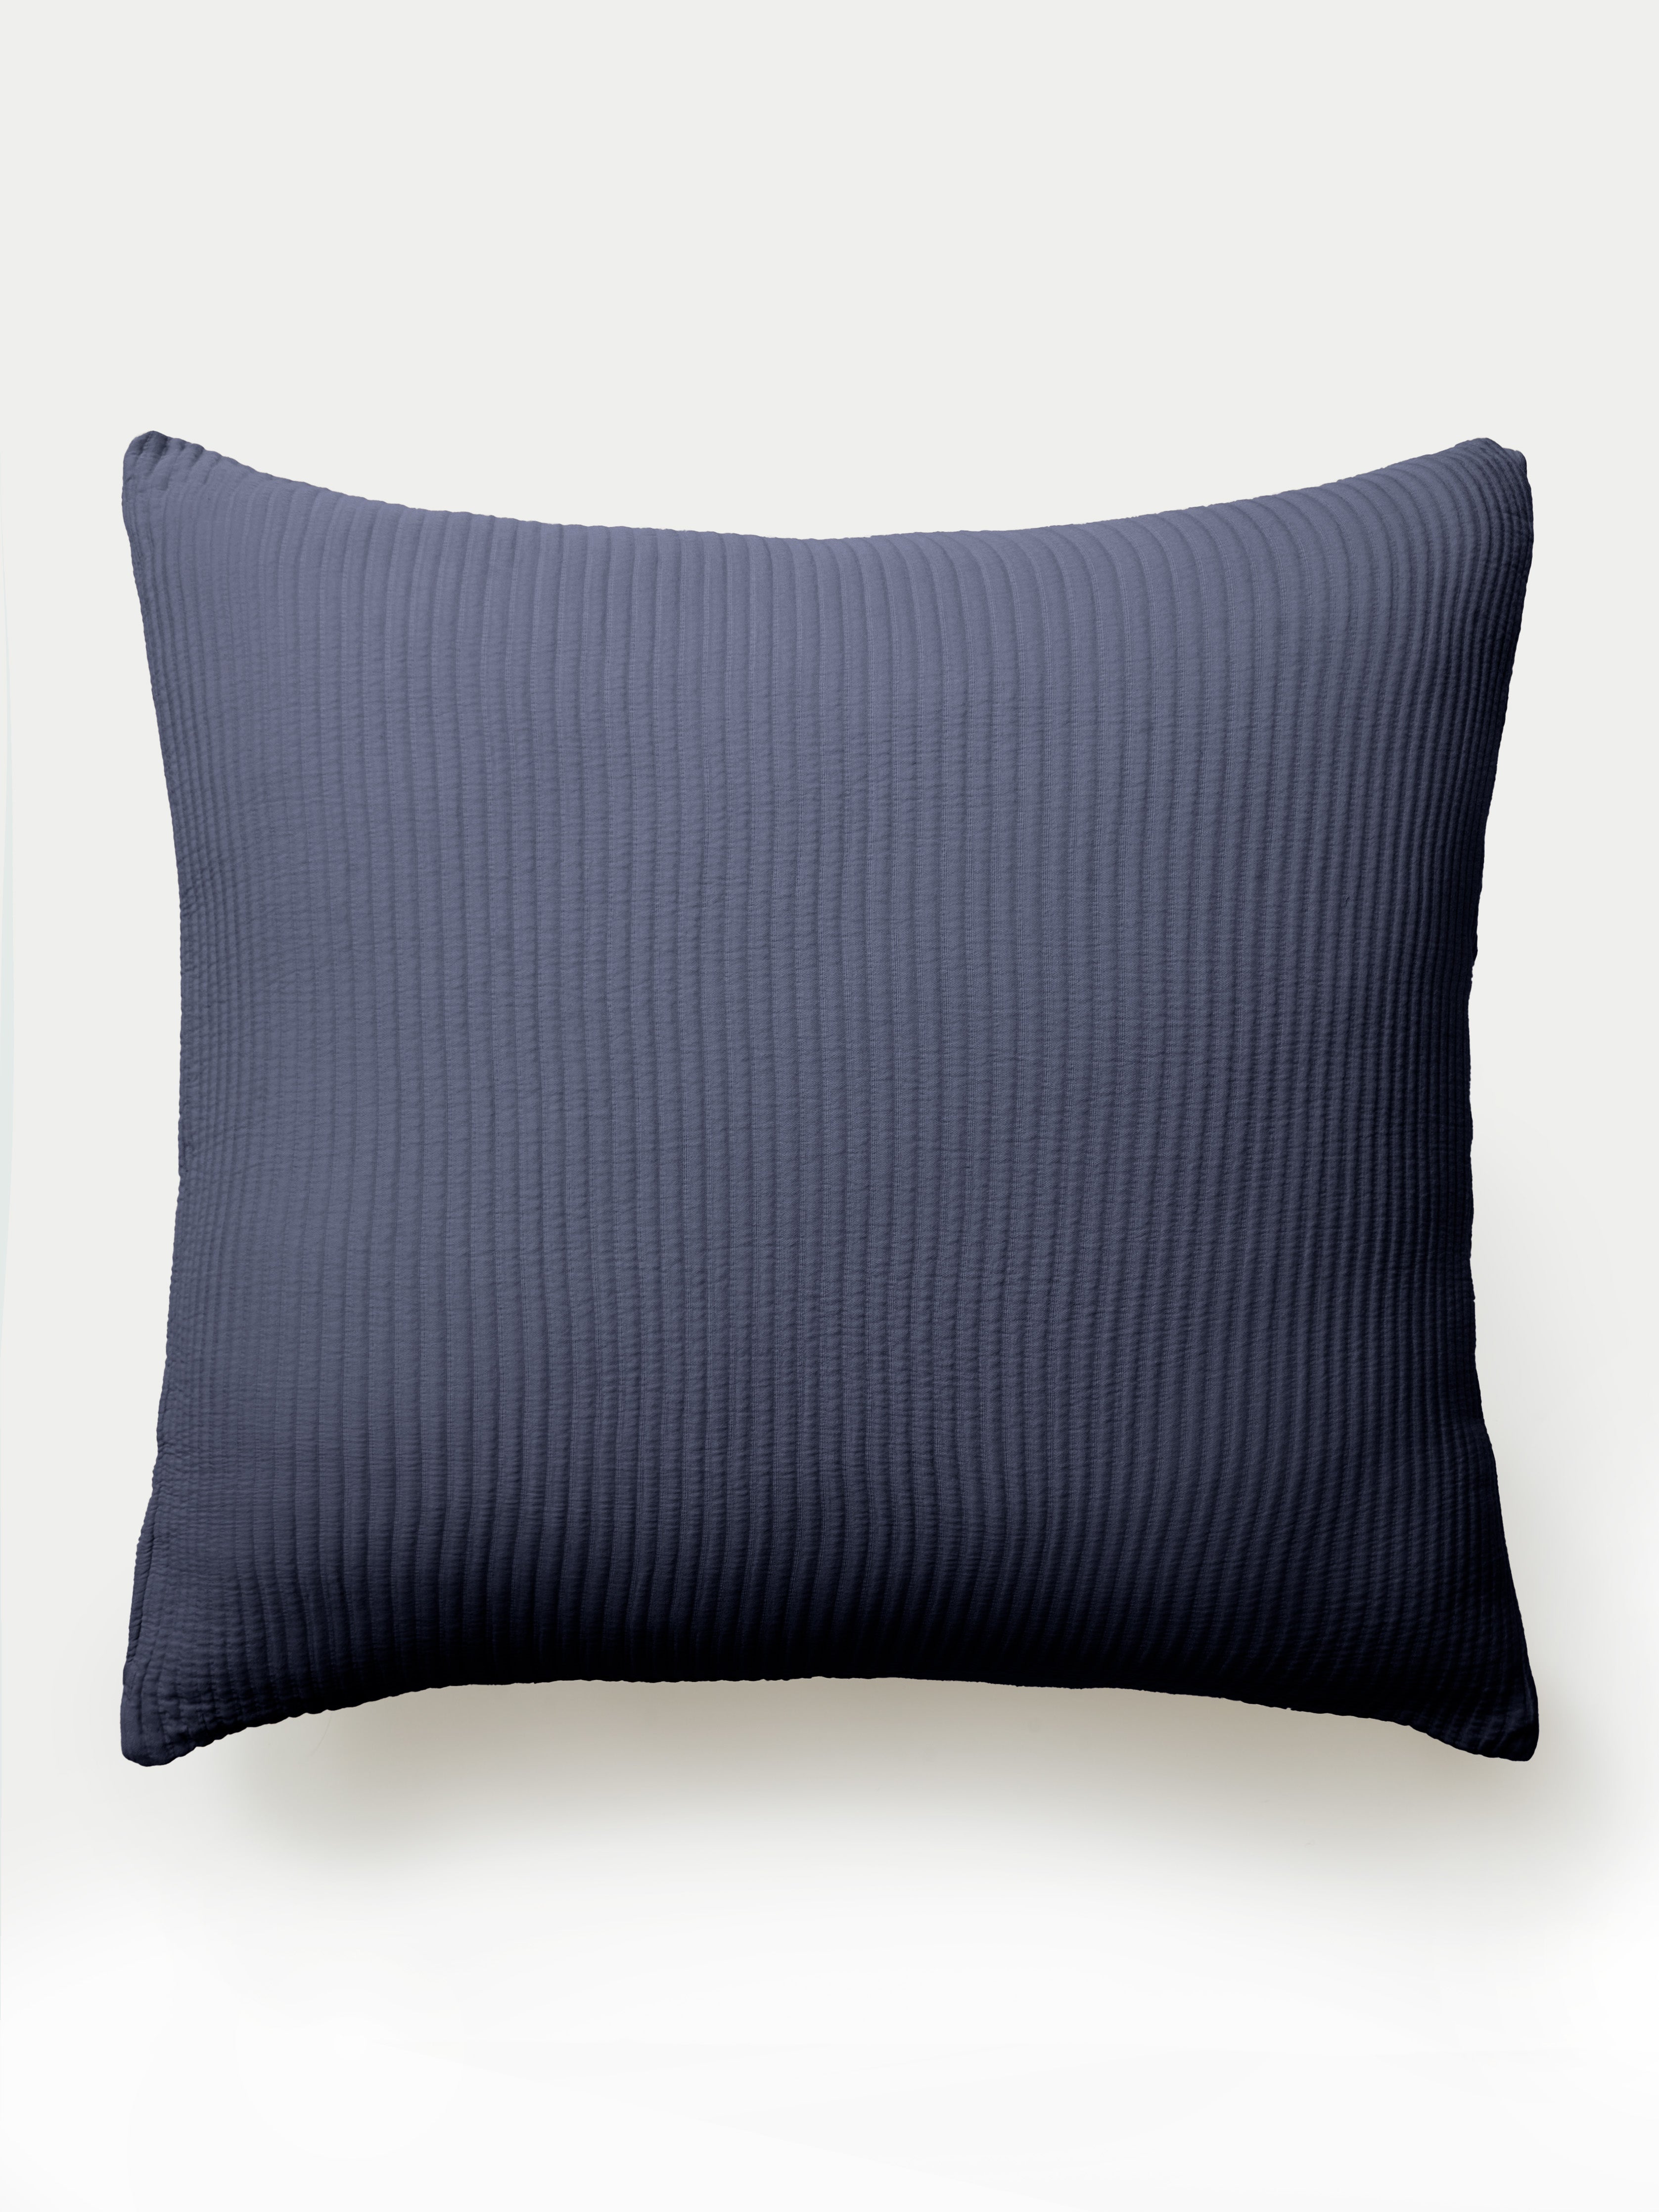 Navy euro coverlet sham with white background |Color:Navy